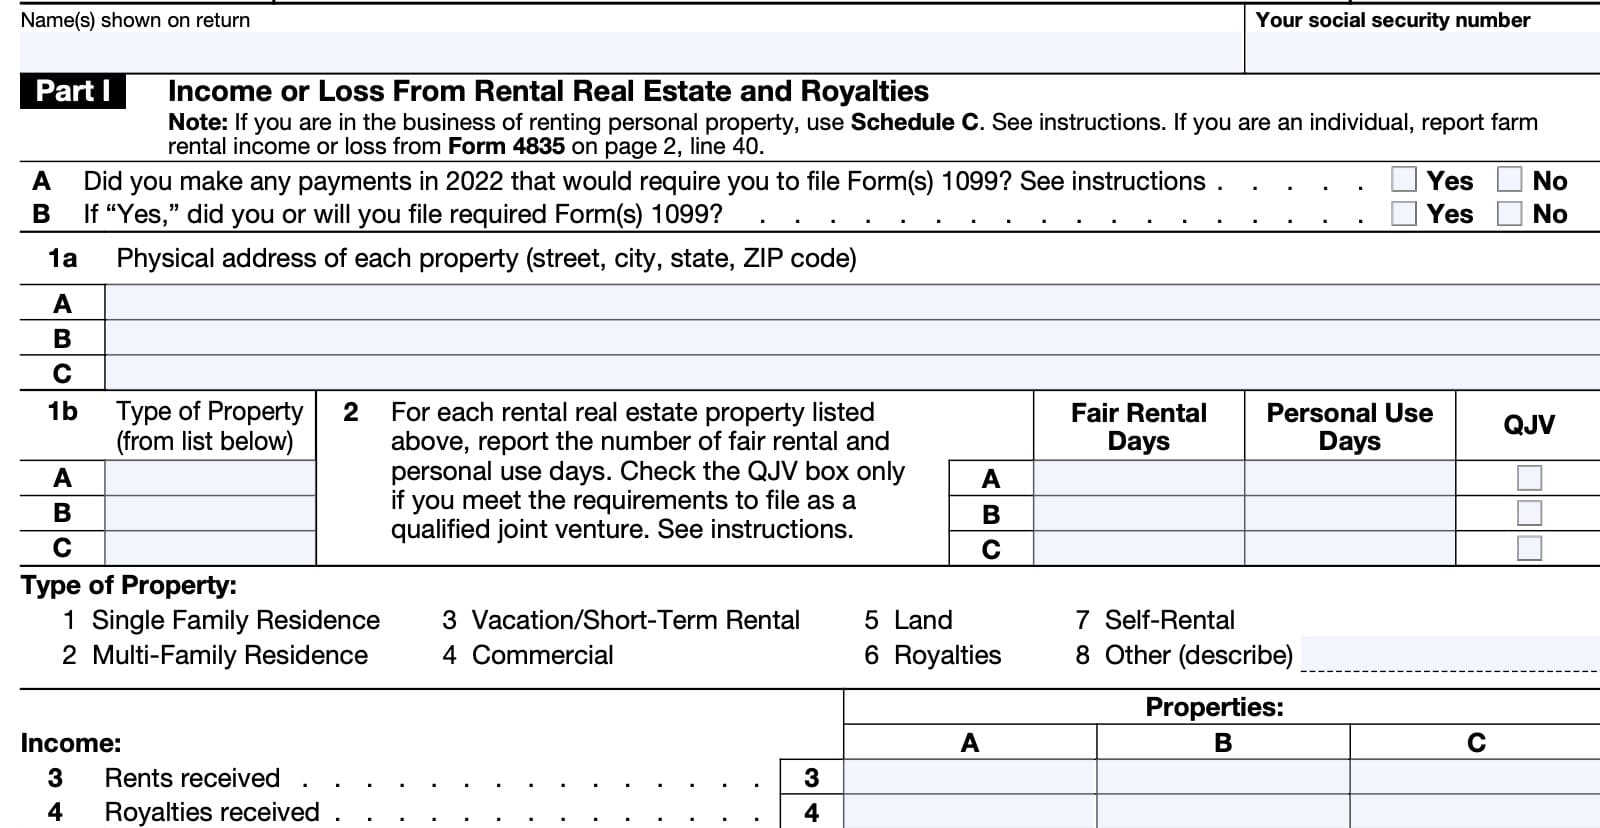 IRS Schedule E, Part I: Income or loss from rental real estate and royalties